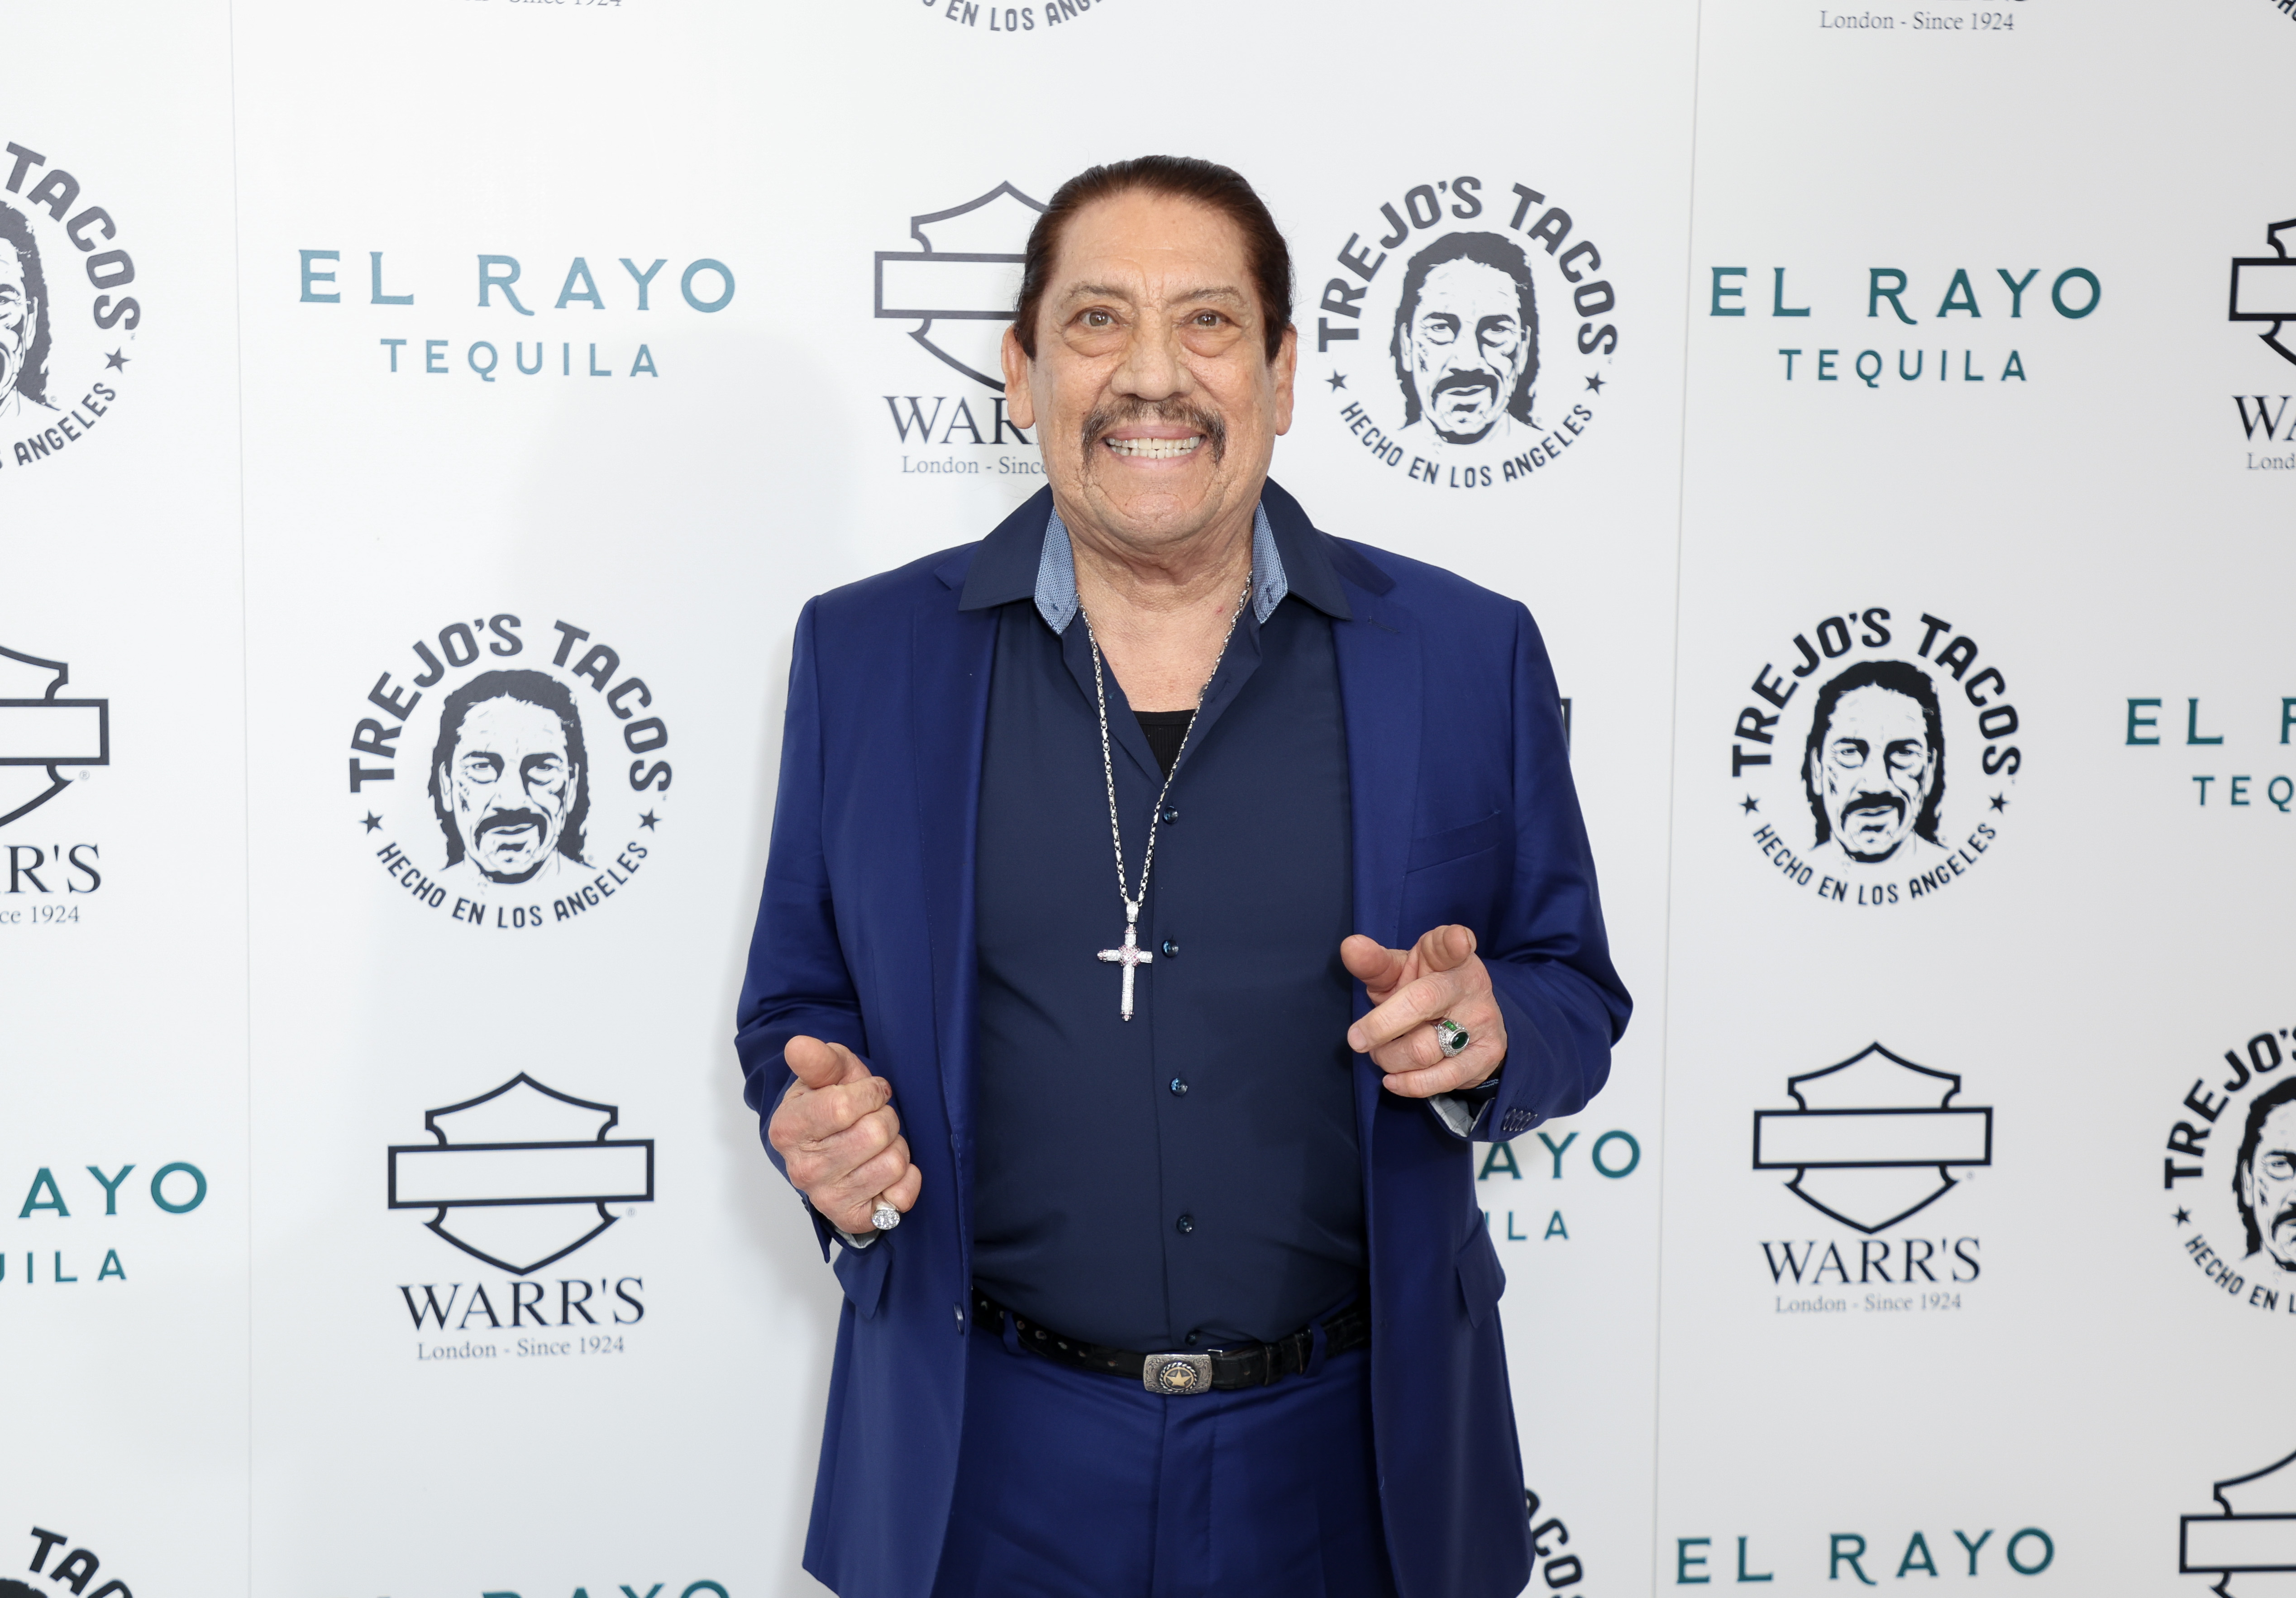 Danny Trejo attends the VIP launch of "Trejo's Tacos" in London, England